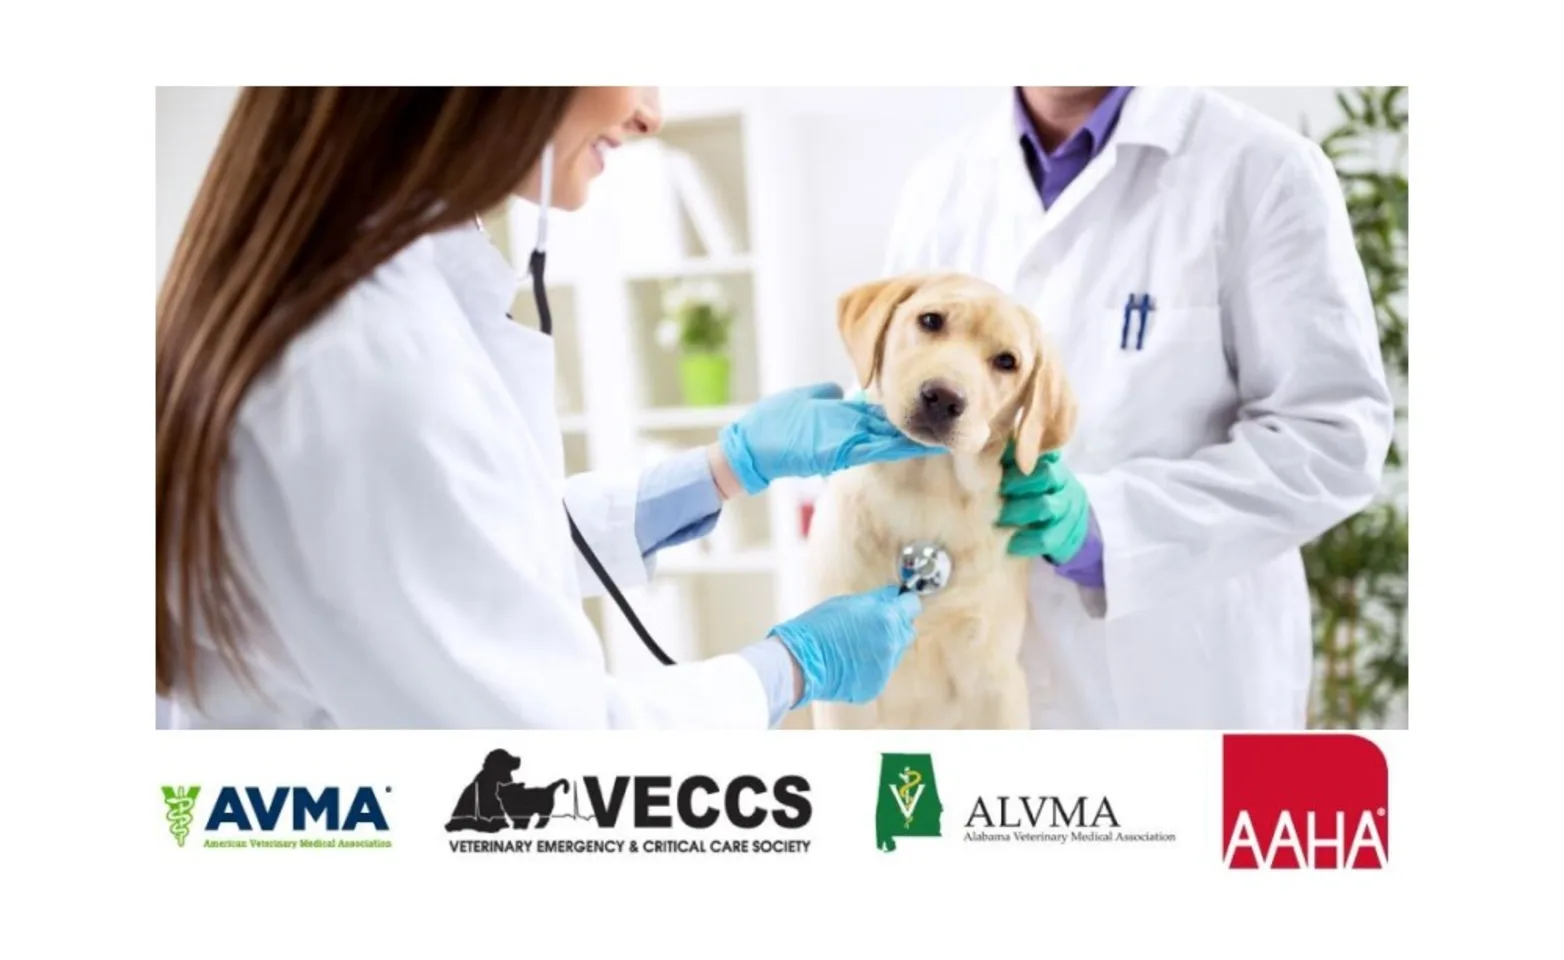 Young dog (puppy) being looked at by veterinary staff with logos for AAHA, AVMA, ALVMA, and VECCS along the bottom